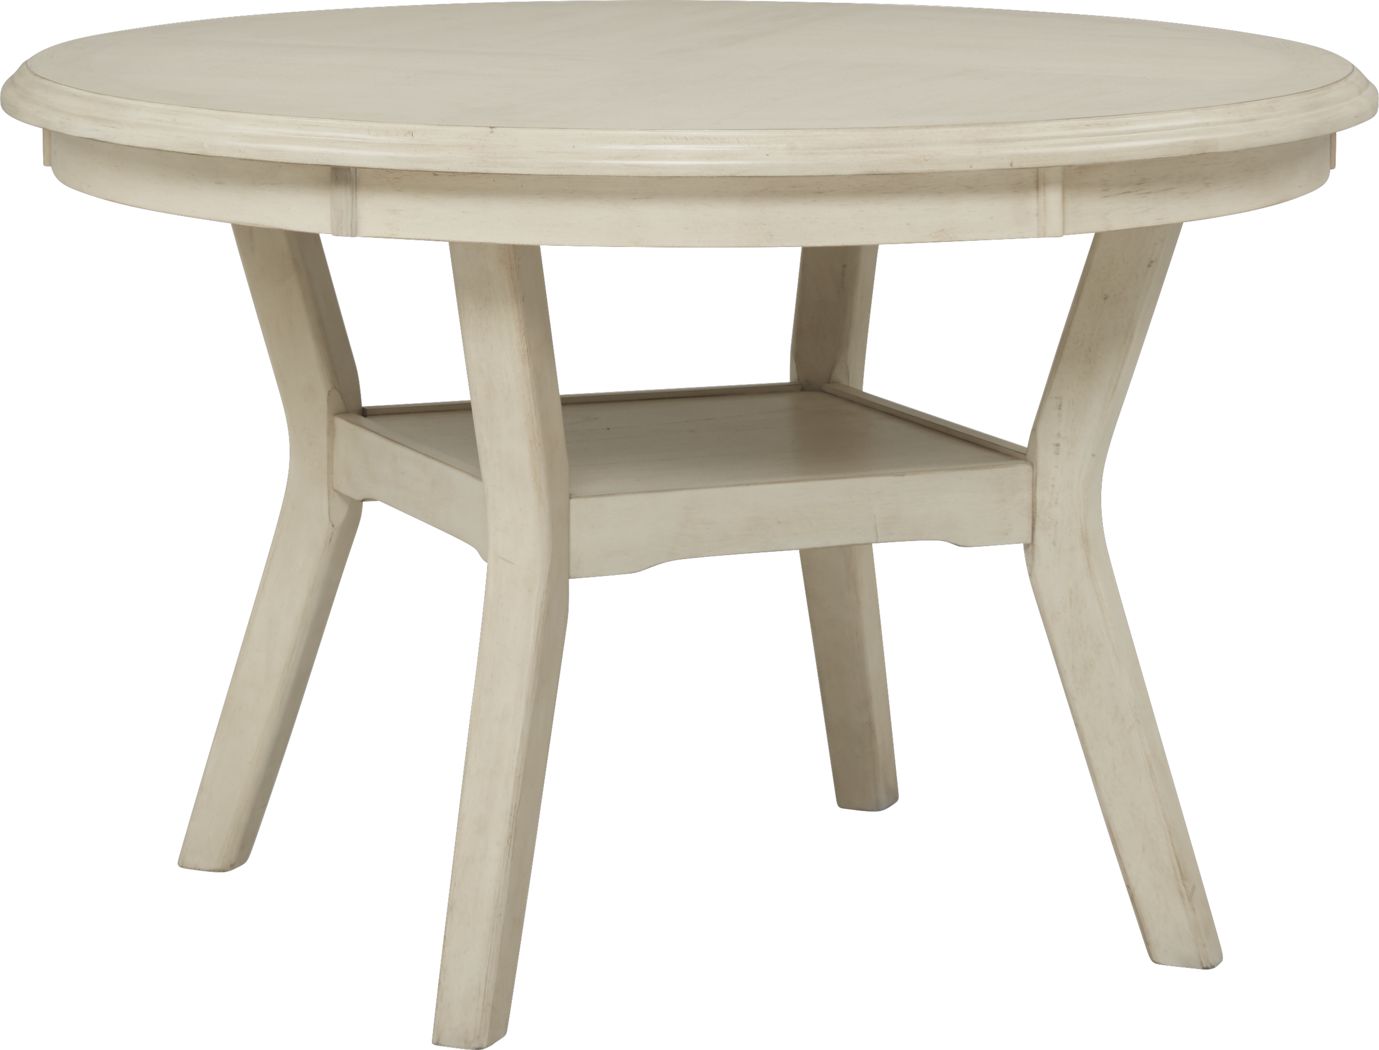 Round Dining Room Tables & Circle Kitchen Tables for Sale